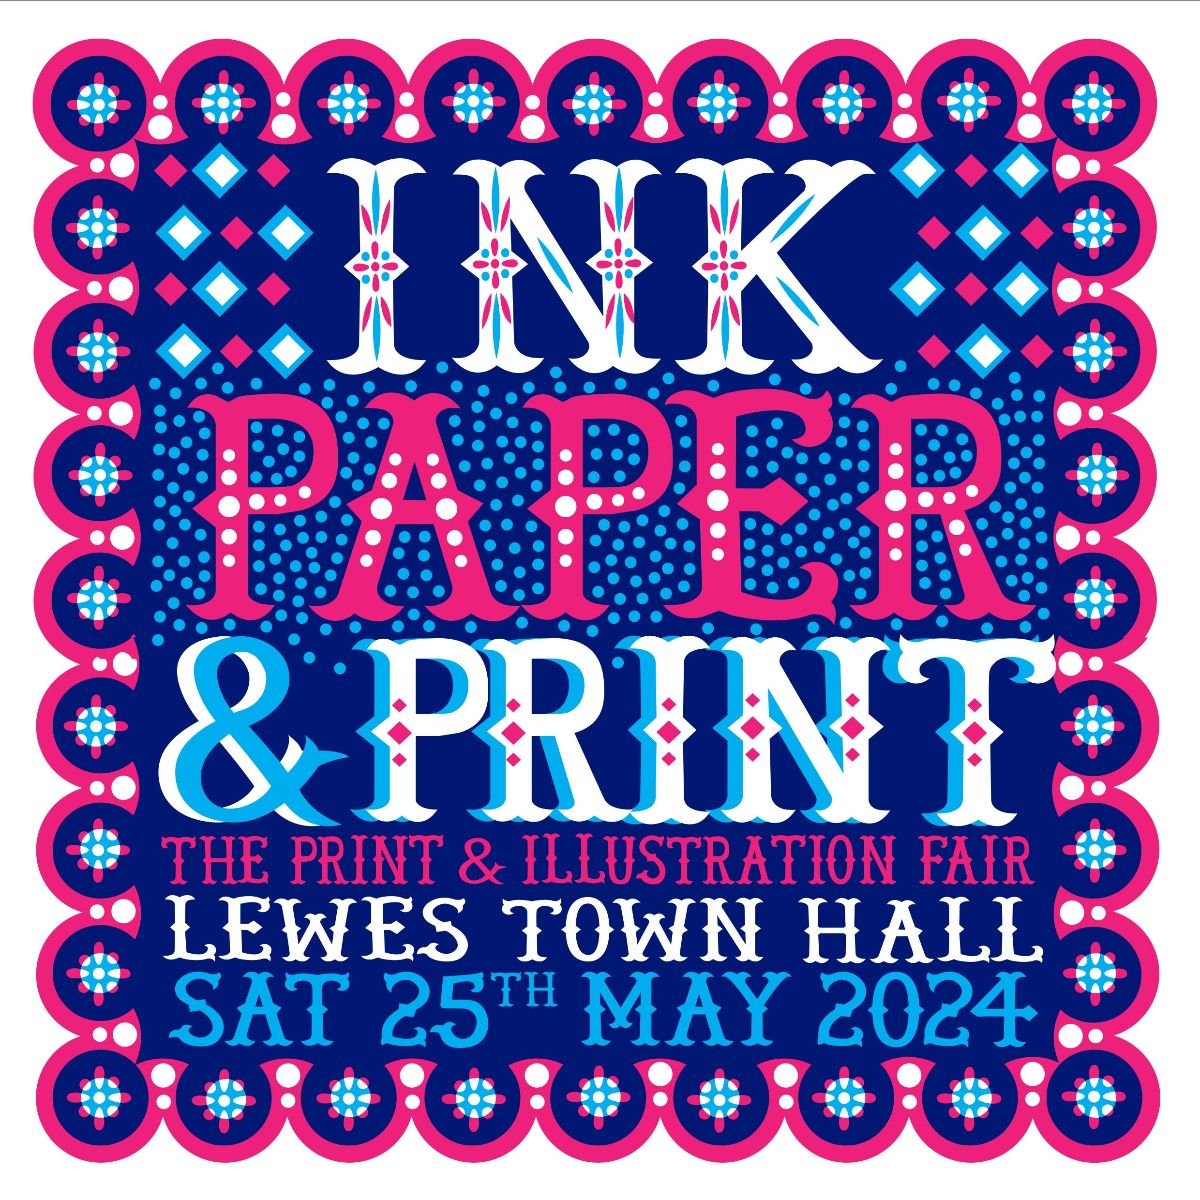 On Saturday the 25th May, I'll be taking part in @inkpaperandprint Illustration Fair at Lewes Town Hall! There will be a diverse selection on display, with lots of talented illustrators, book artists, ceramicists and creative makers 🖍🖌✏️🖊

It's go